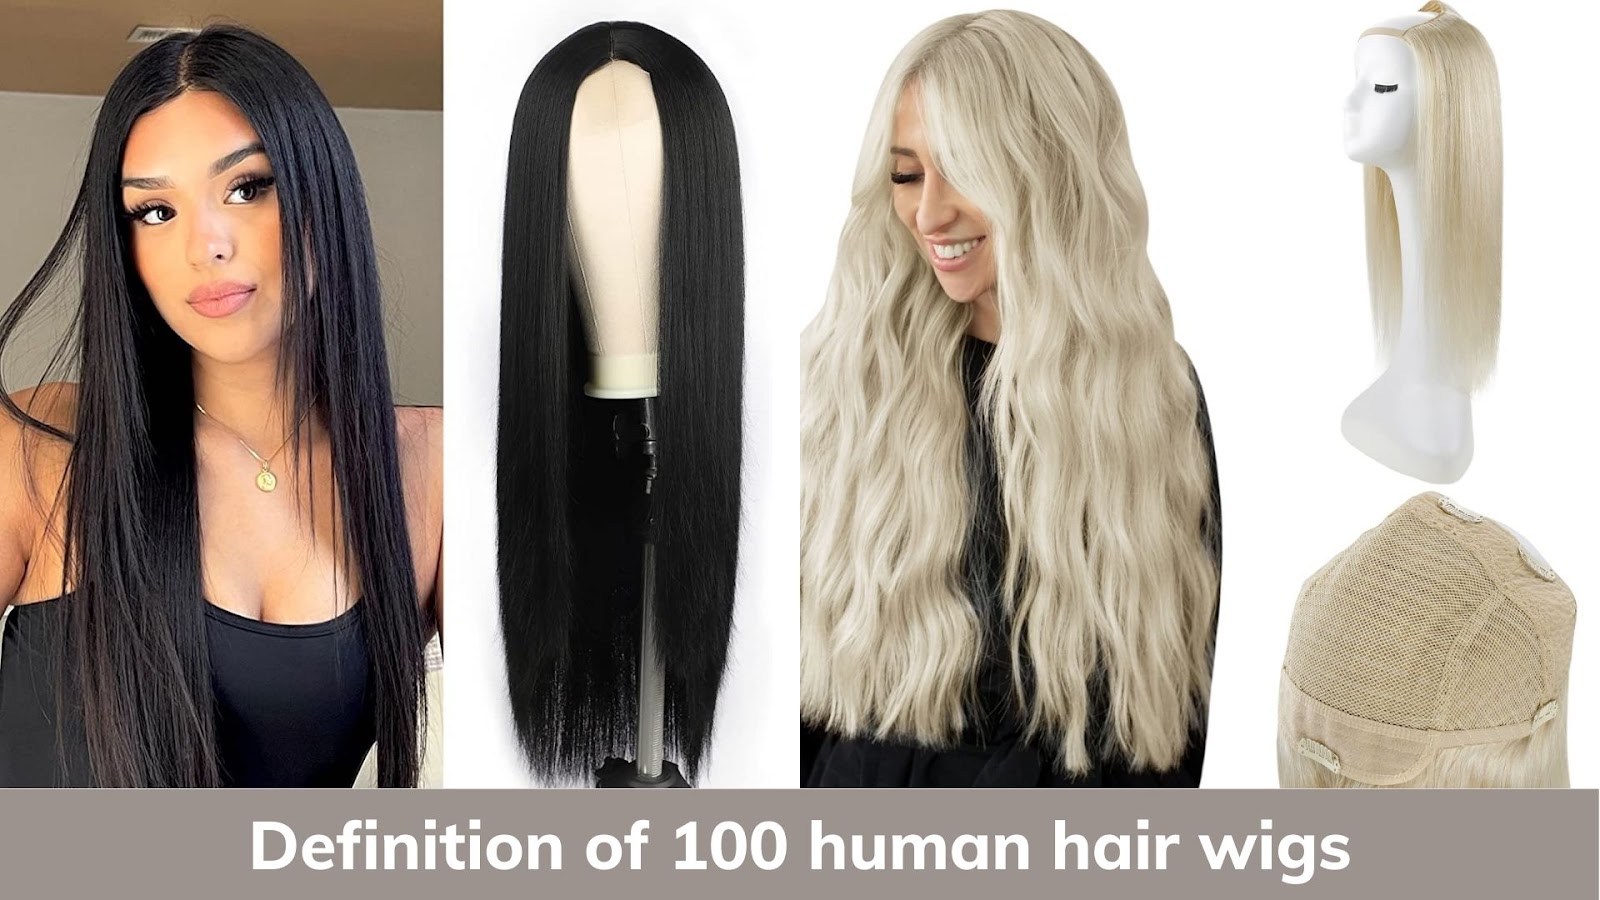 Definition of 100 human hair wigs